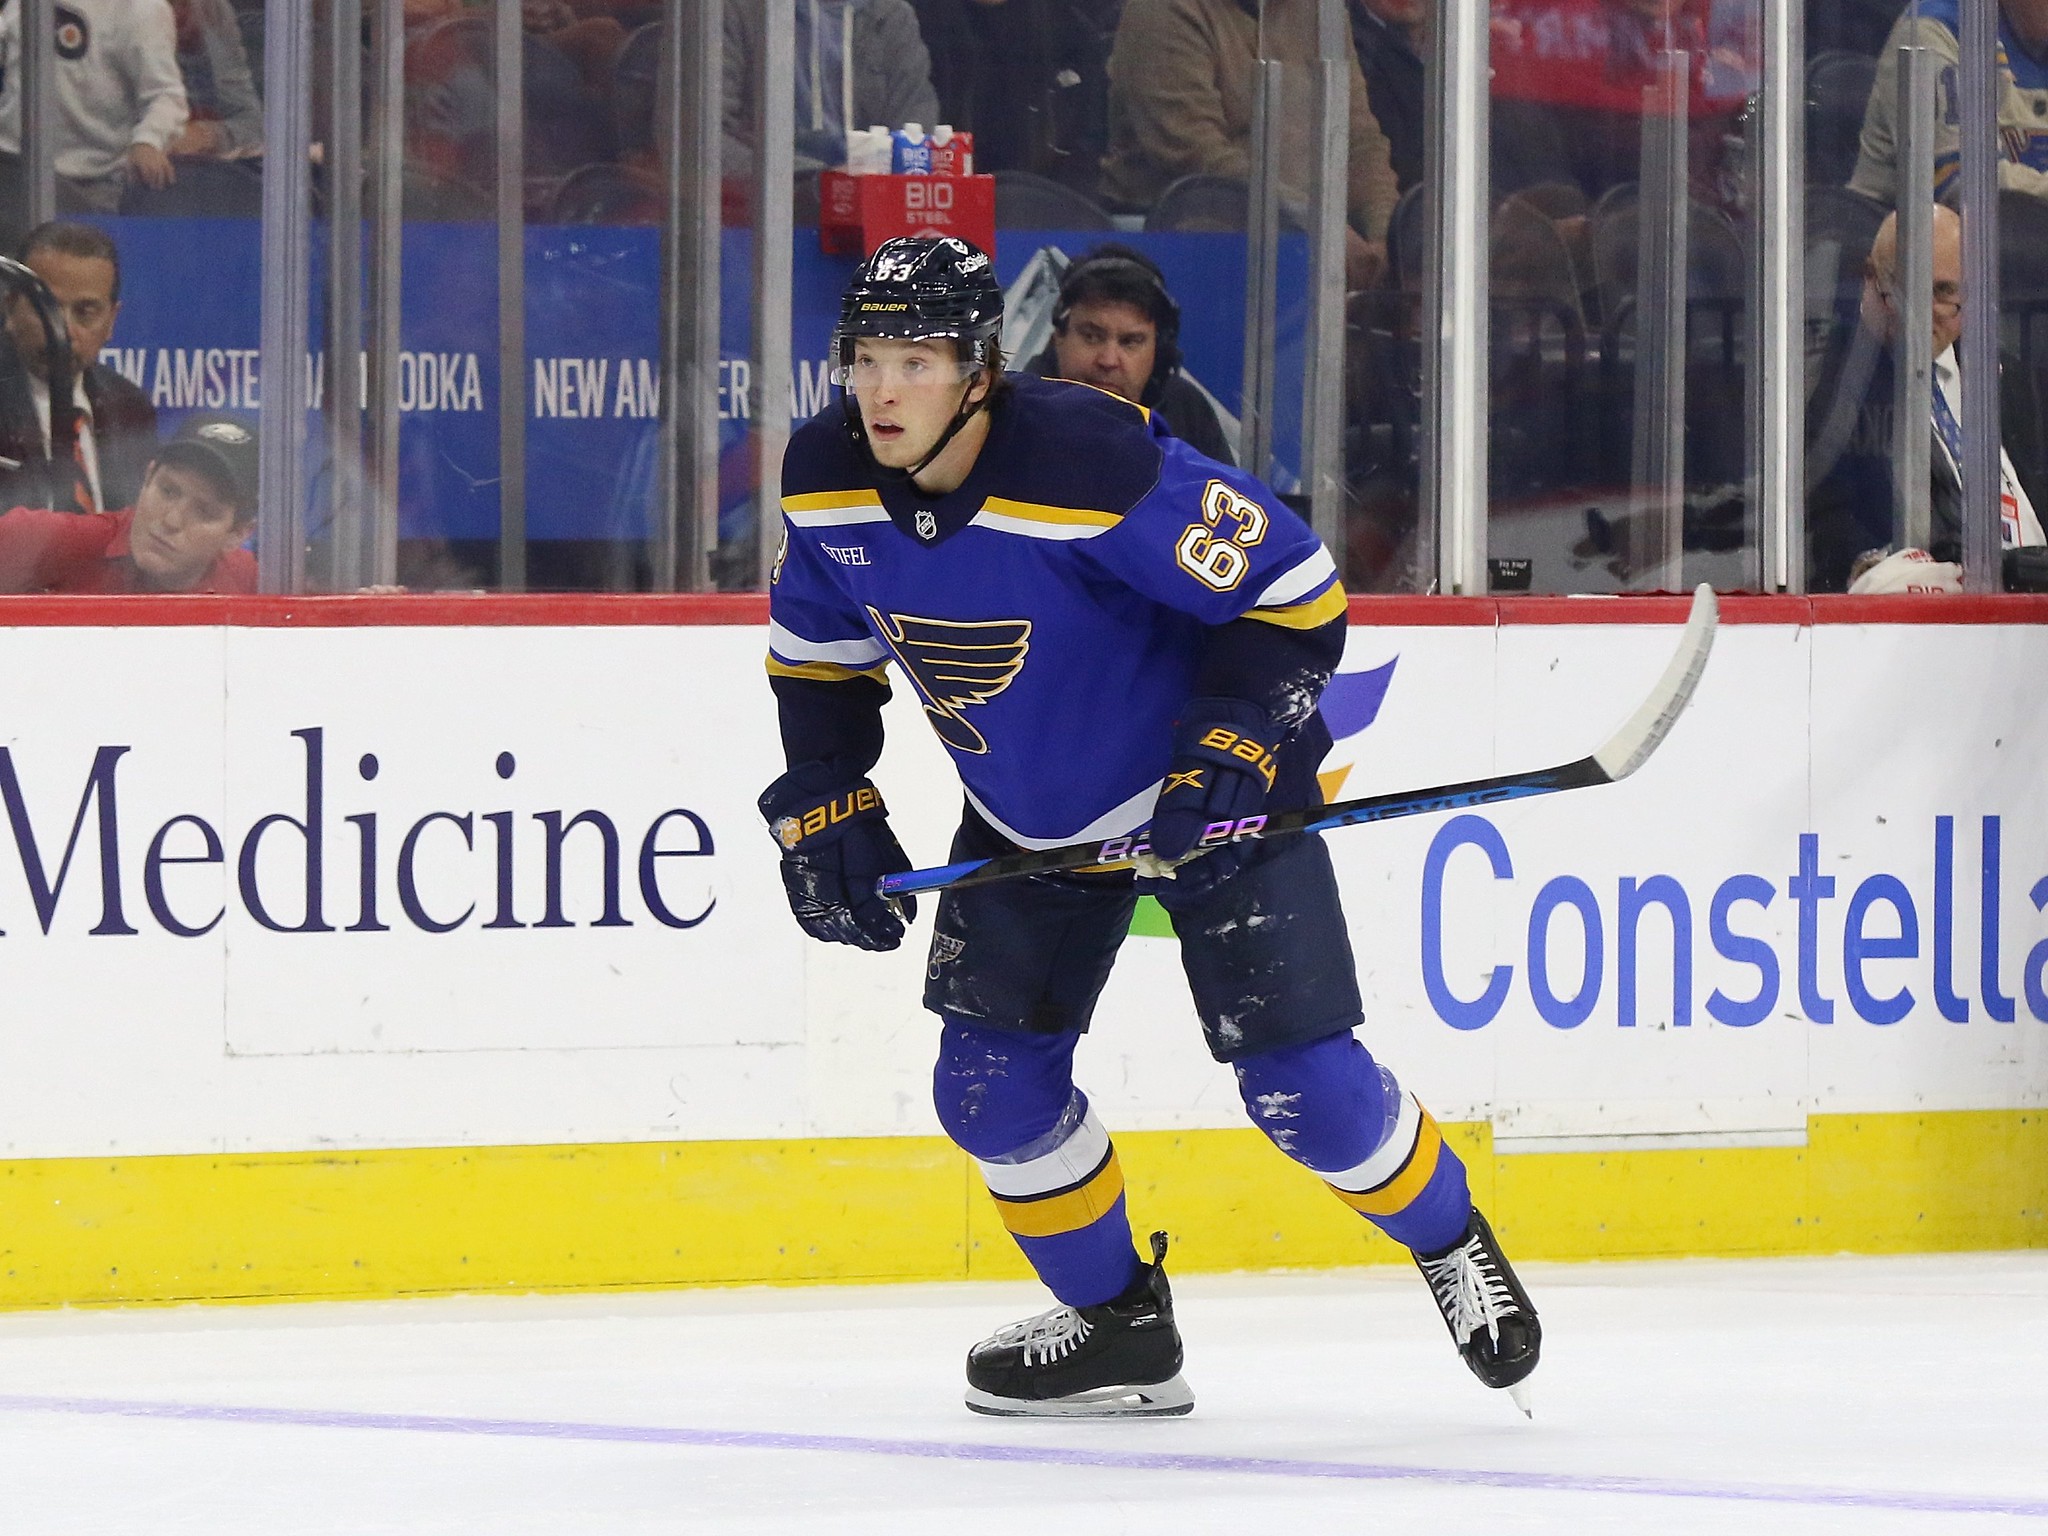 St. Louis Blues Forward Neighbours Shines with Versatility and Growth in Breakout Season